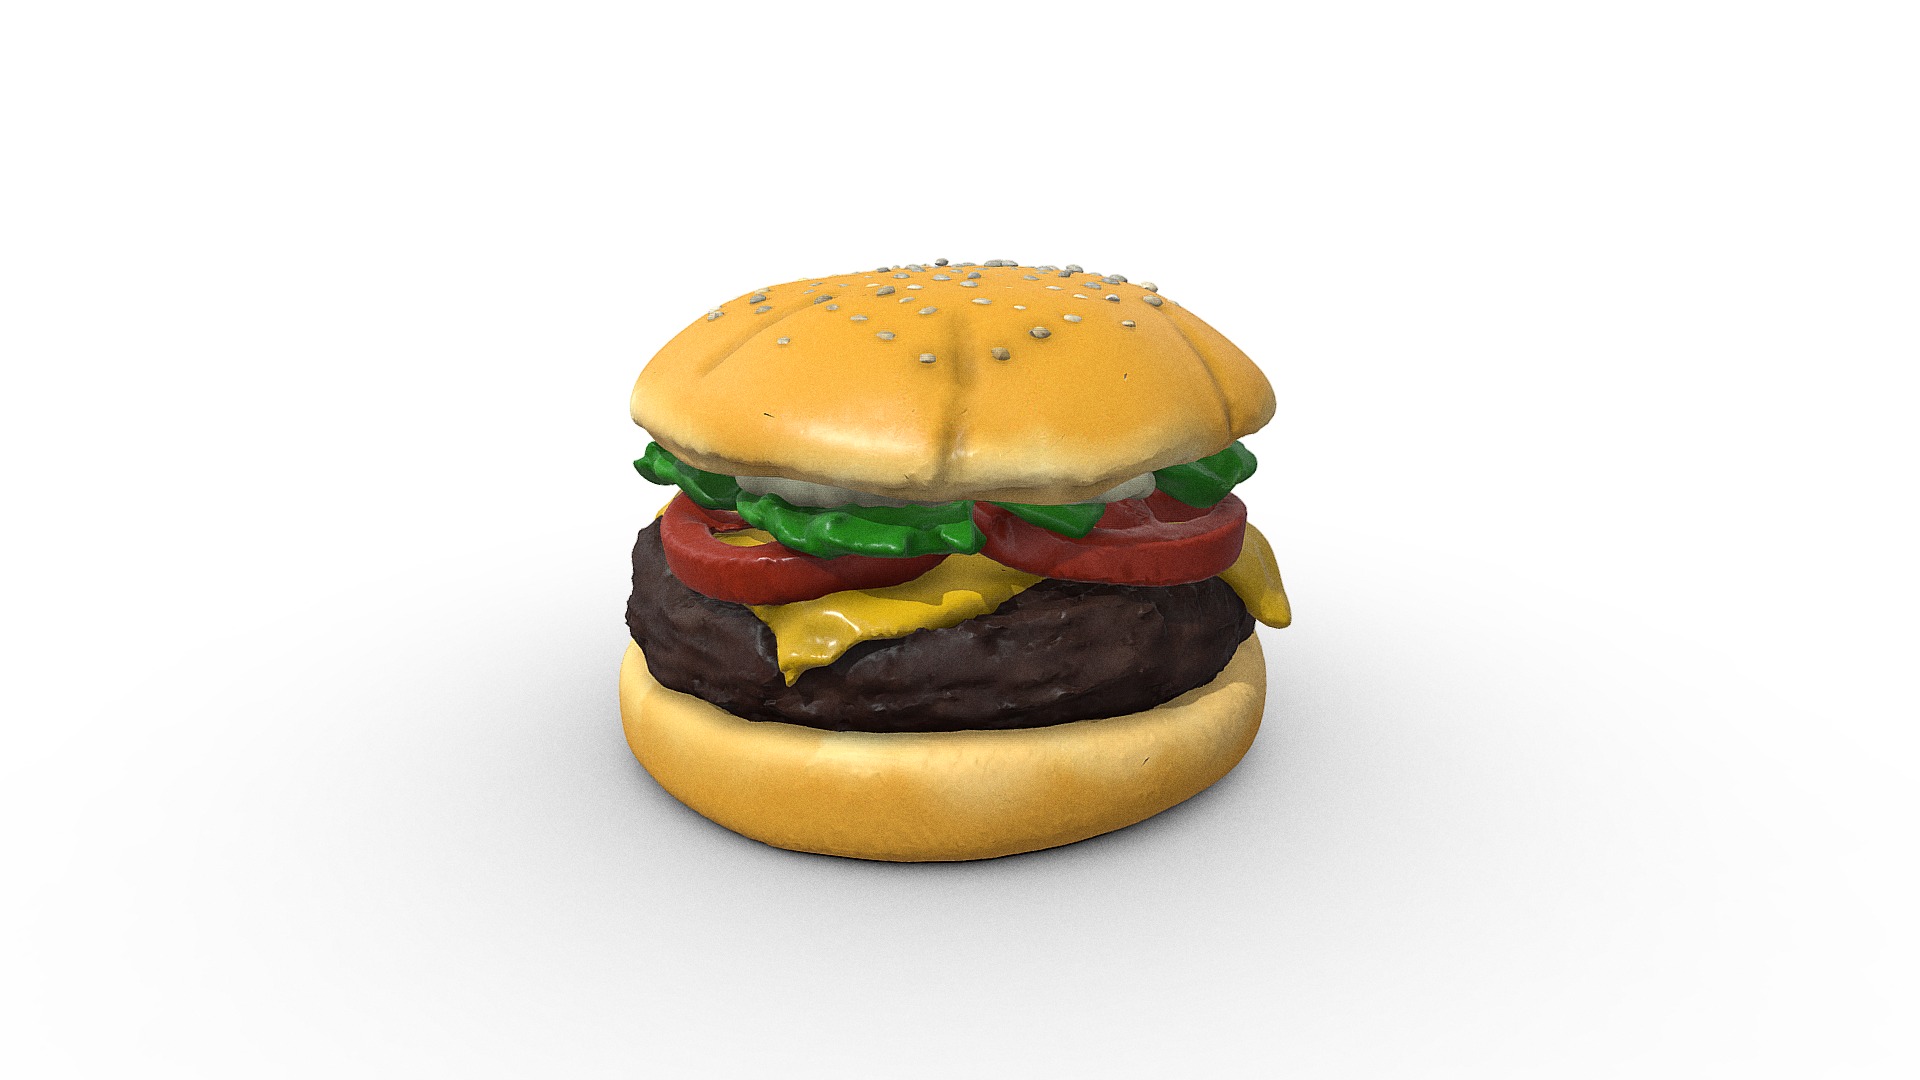 3D model Burger sculpted in VR and configurator - This is a 3D model of the Burger sculpted in VR and configurator. The 3D model is about a cheeseburger with a sesame seed bun.